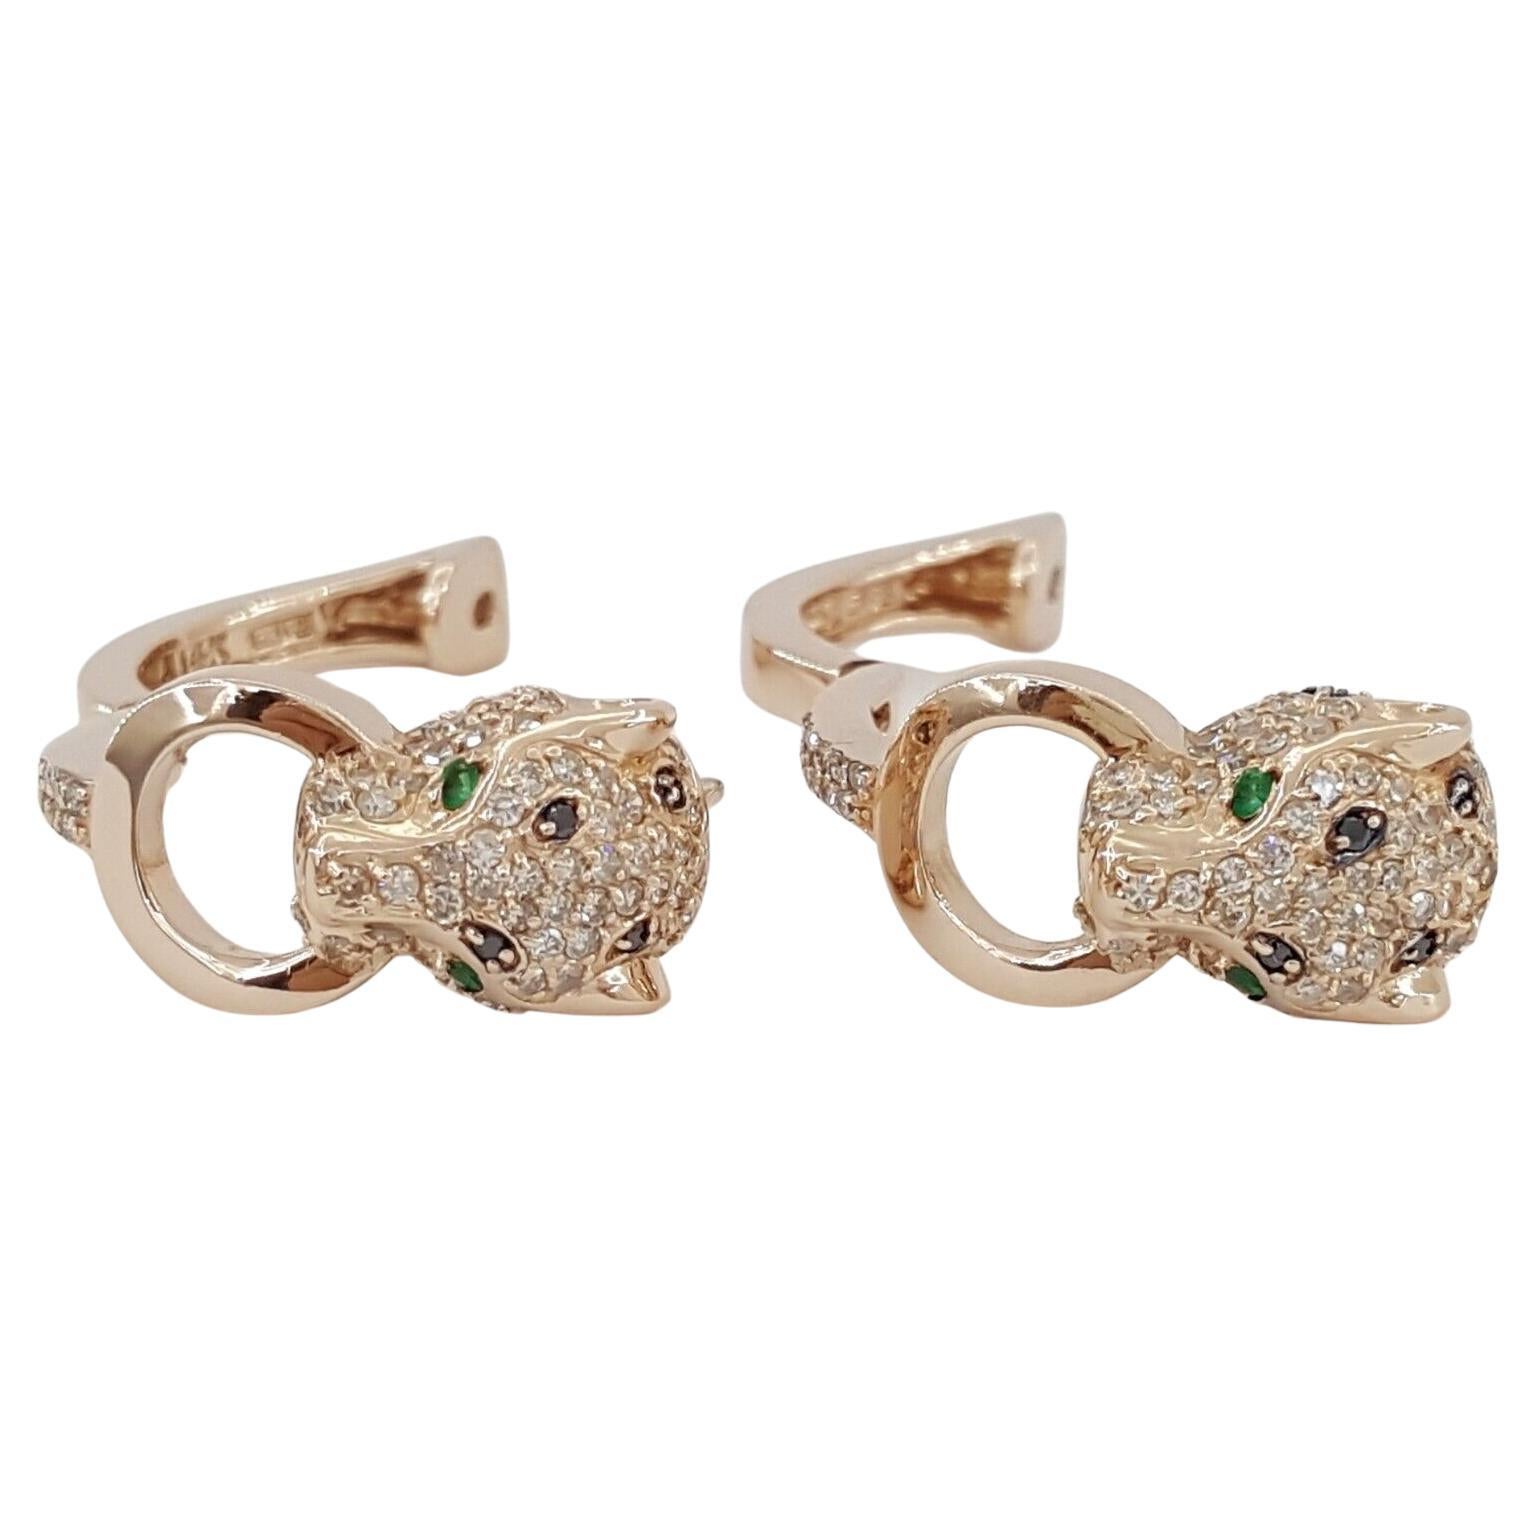 Modern EFFY's distinctive Panther Hoops Earrings crafted in 14k Rose Gold For Sale